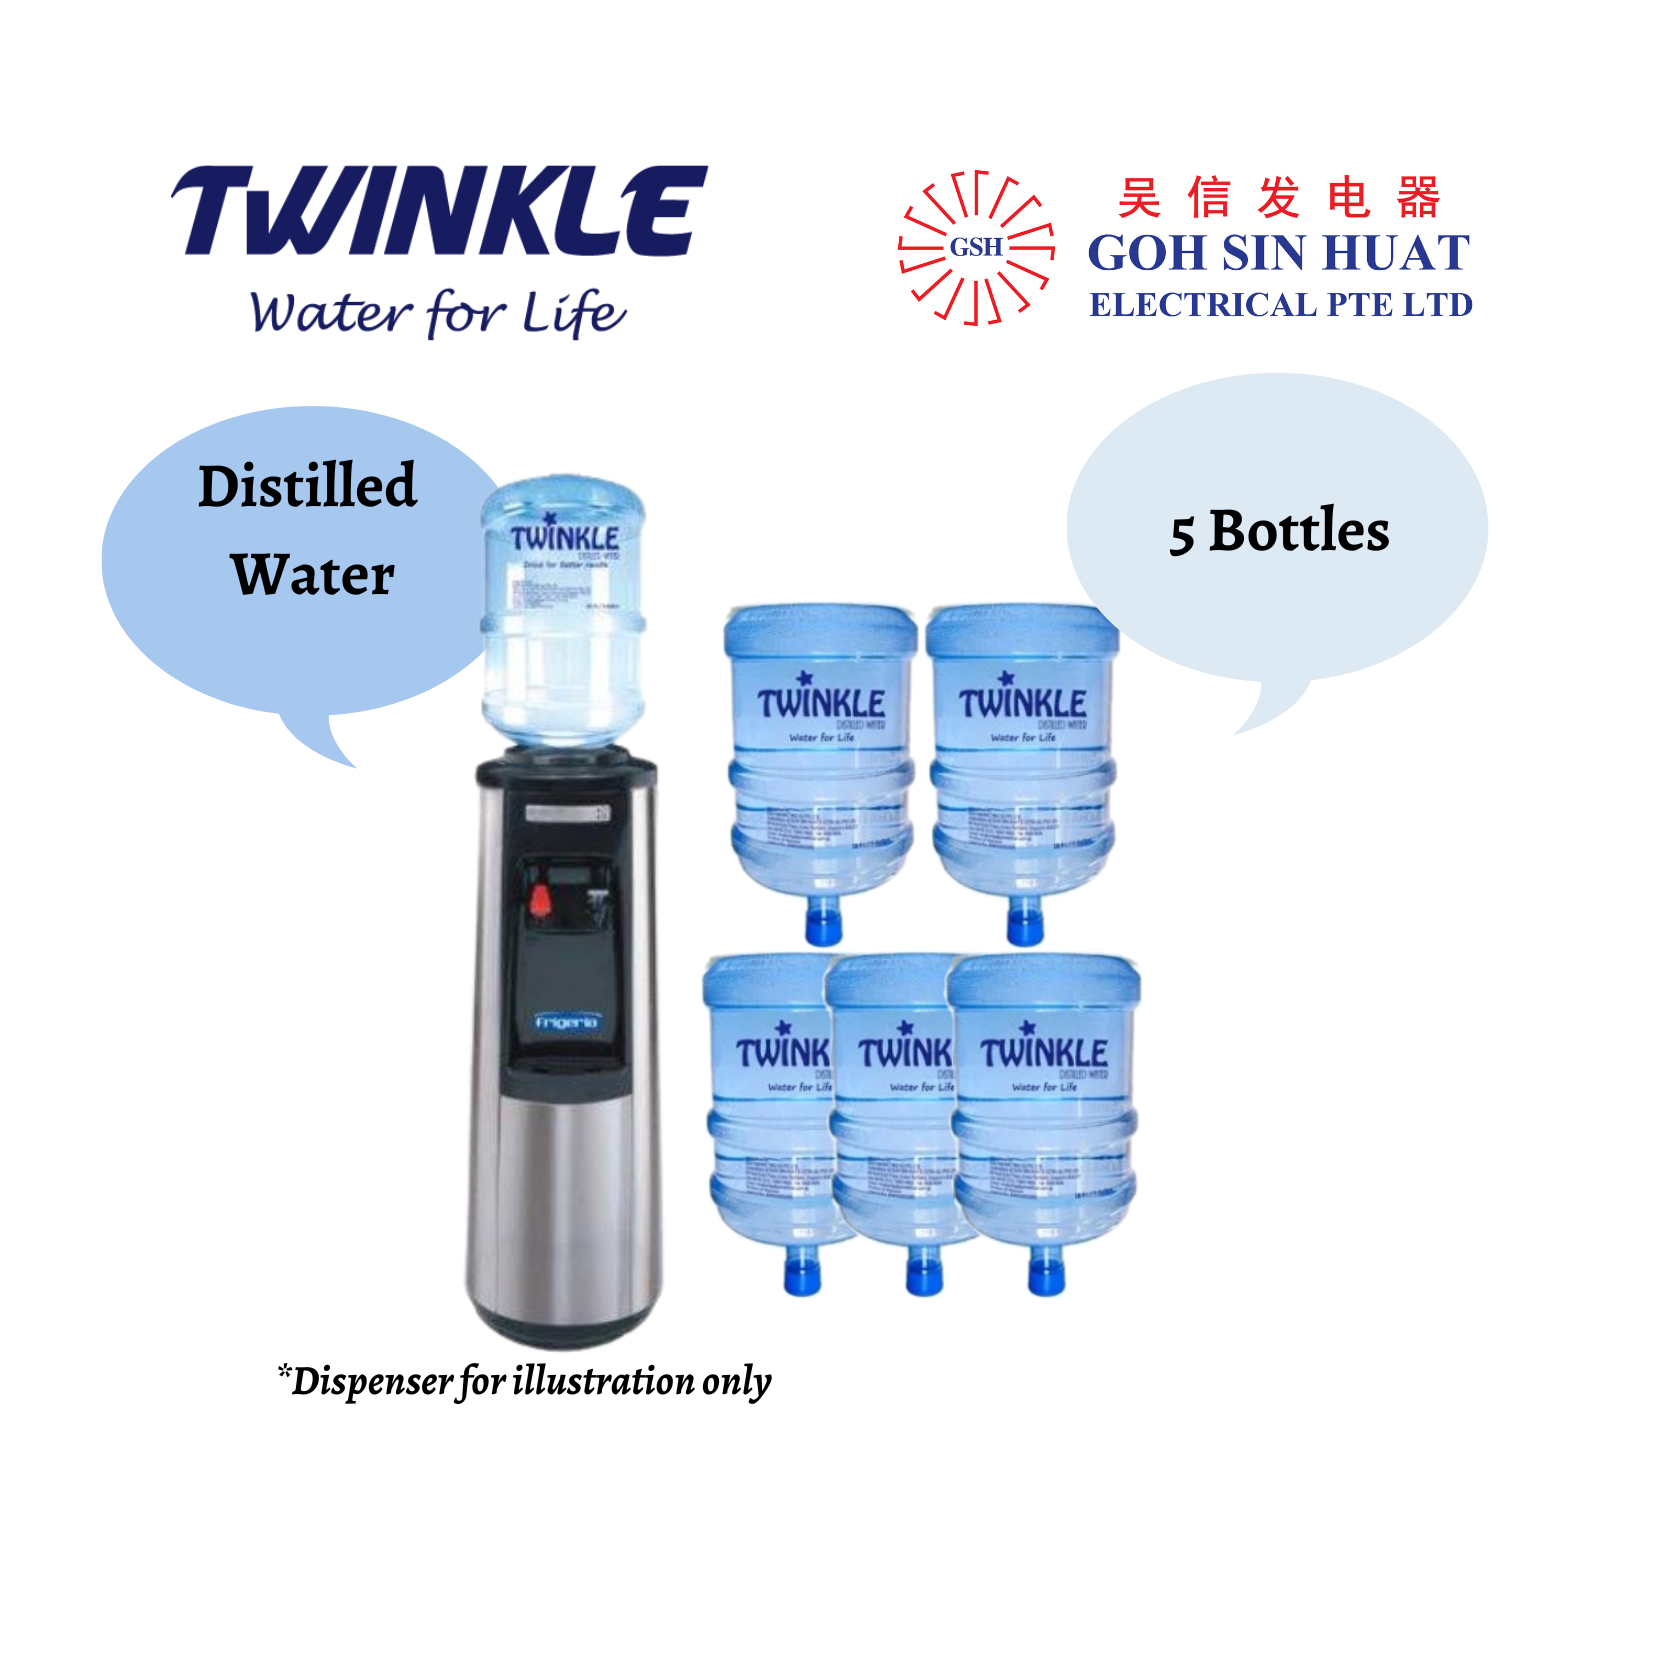 Twinkle 19L/ 5 Gallons Distilled Bottled Water *For Existing Customer